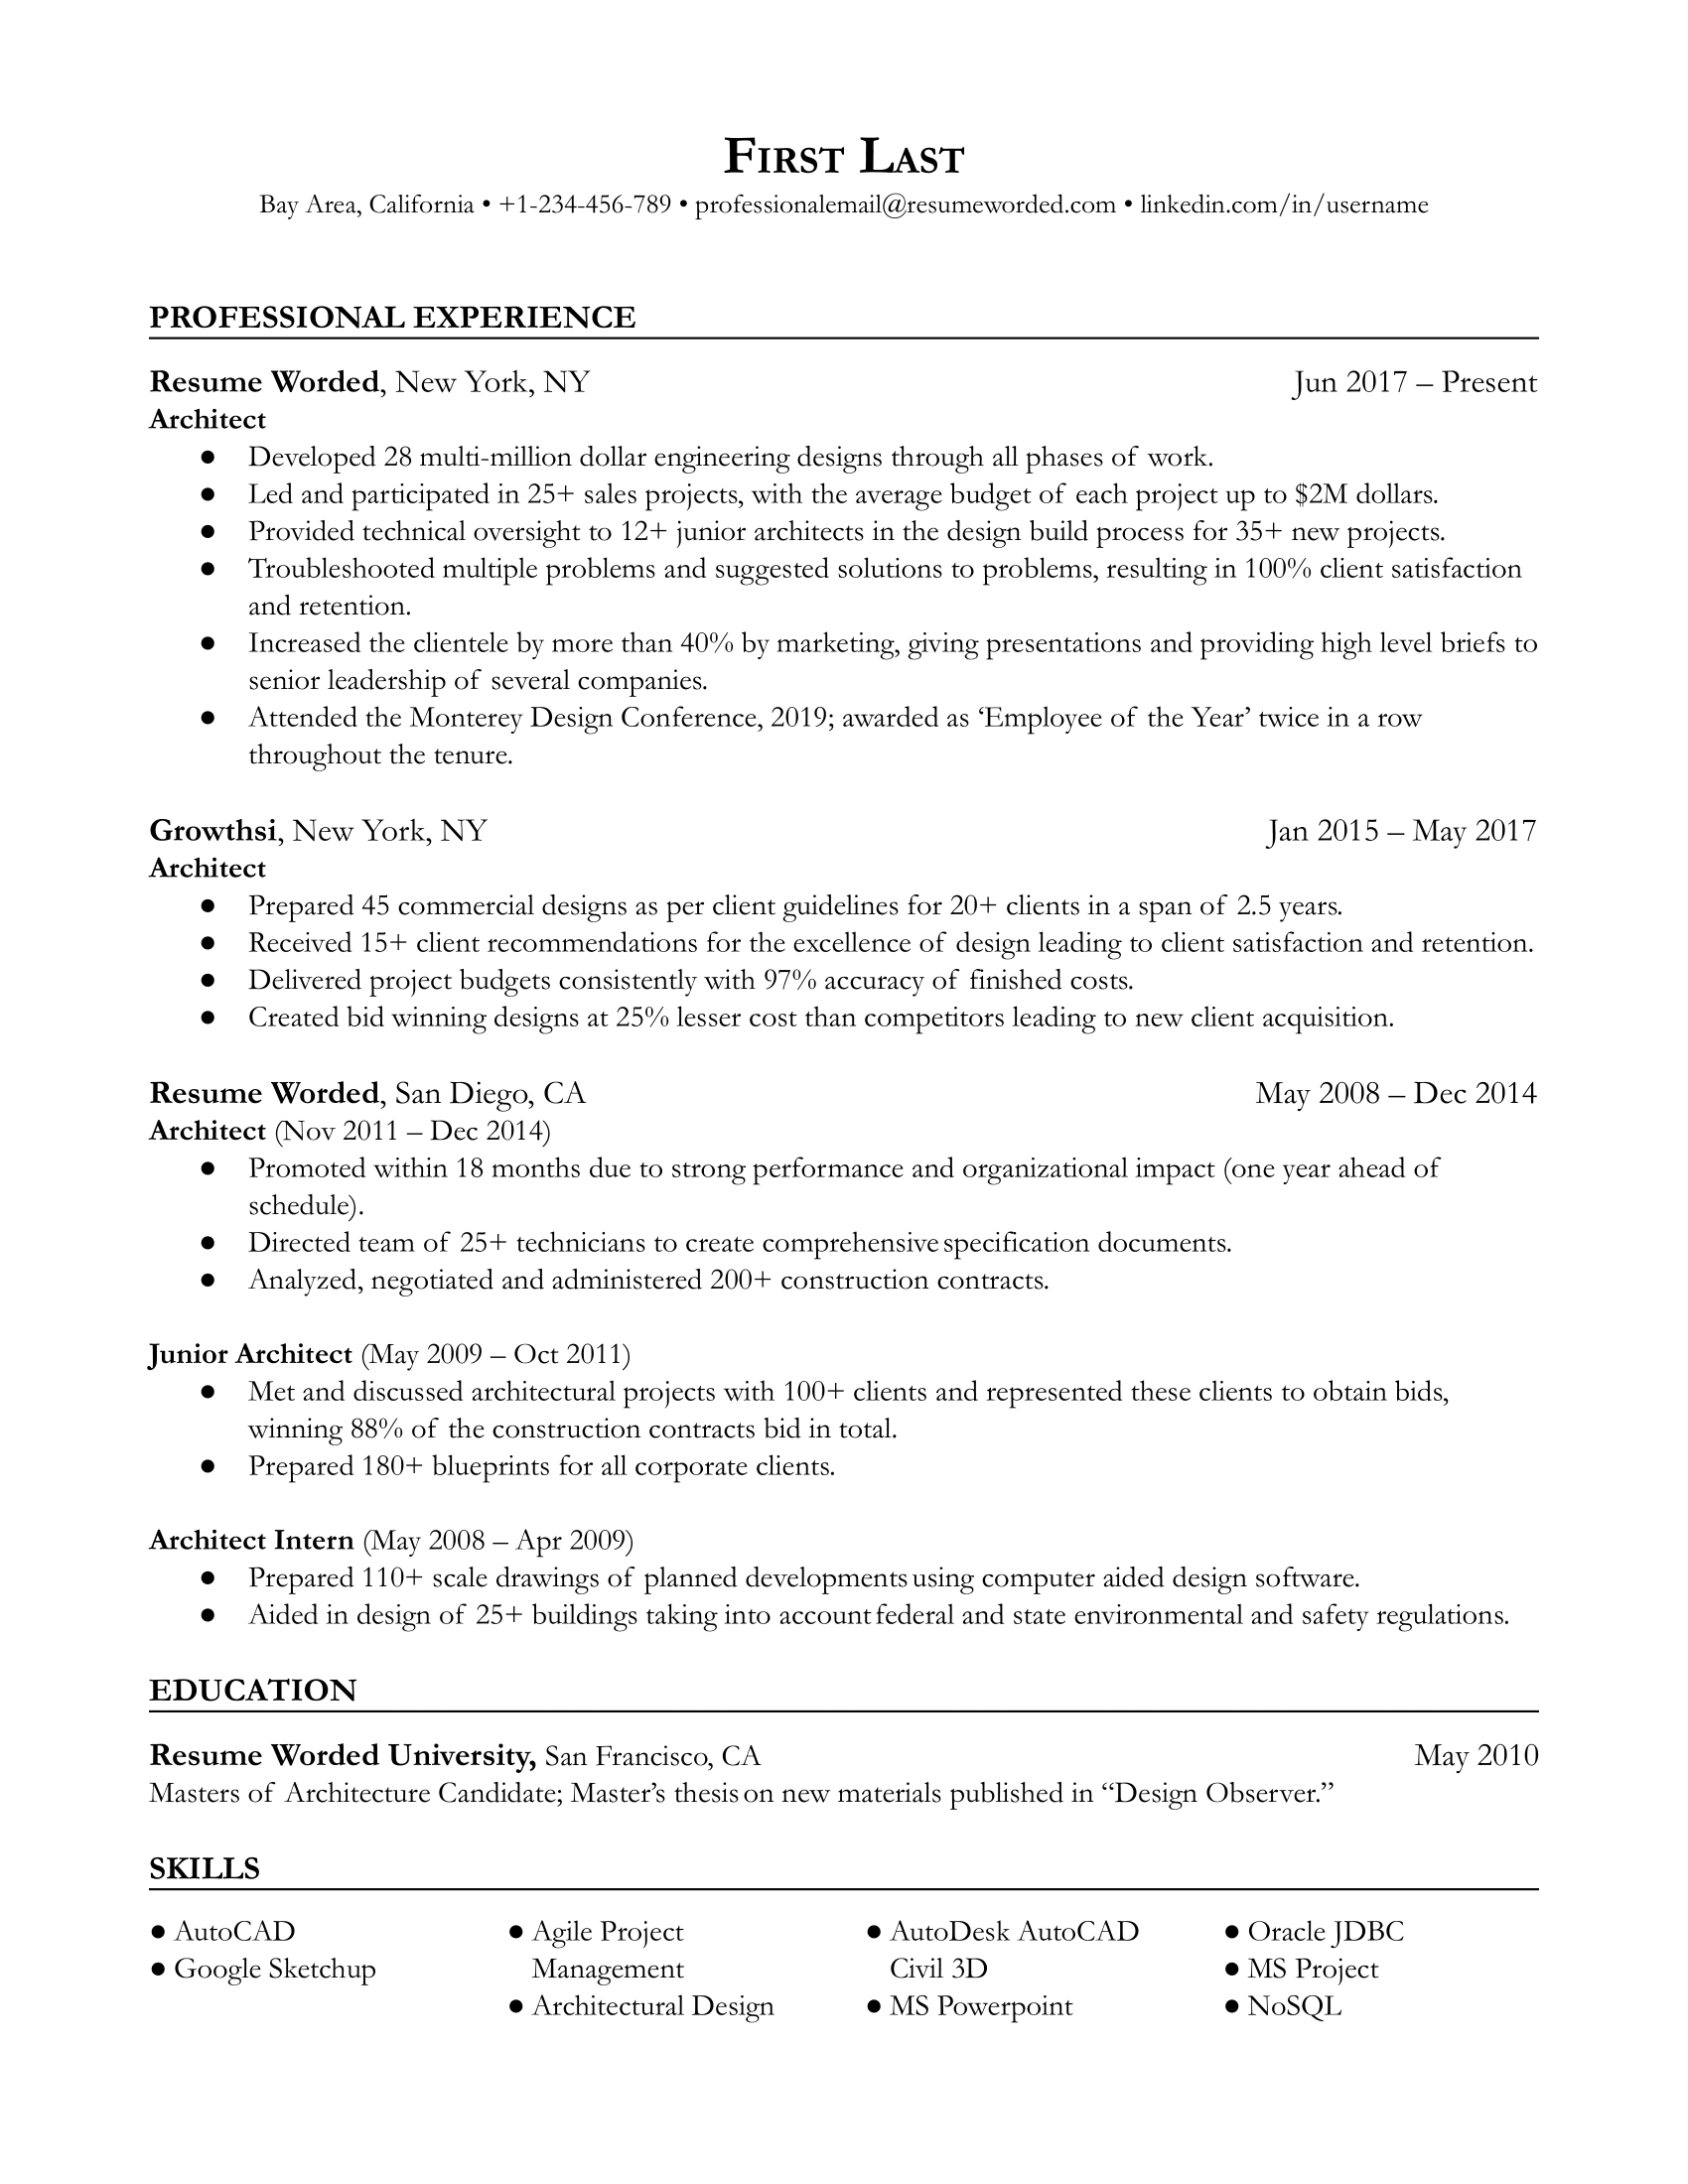 Architect / Architecture Resume Template + Example